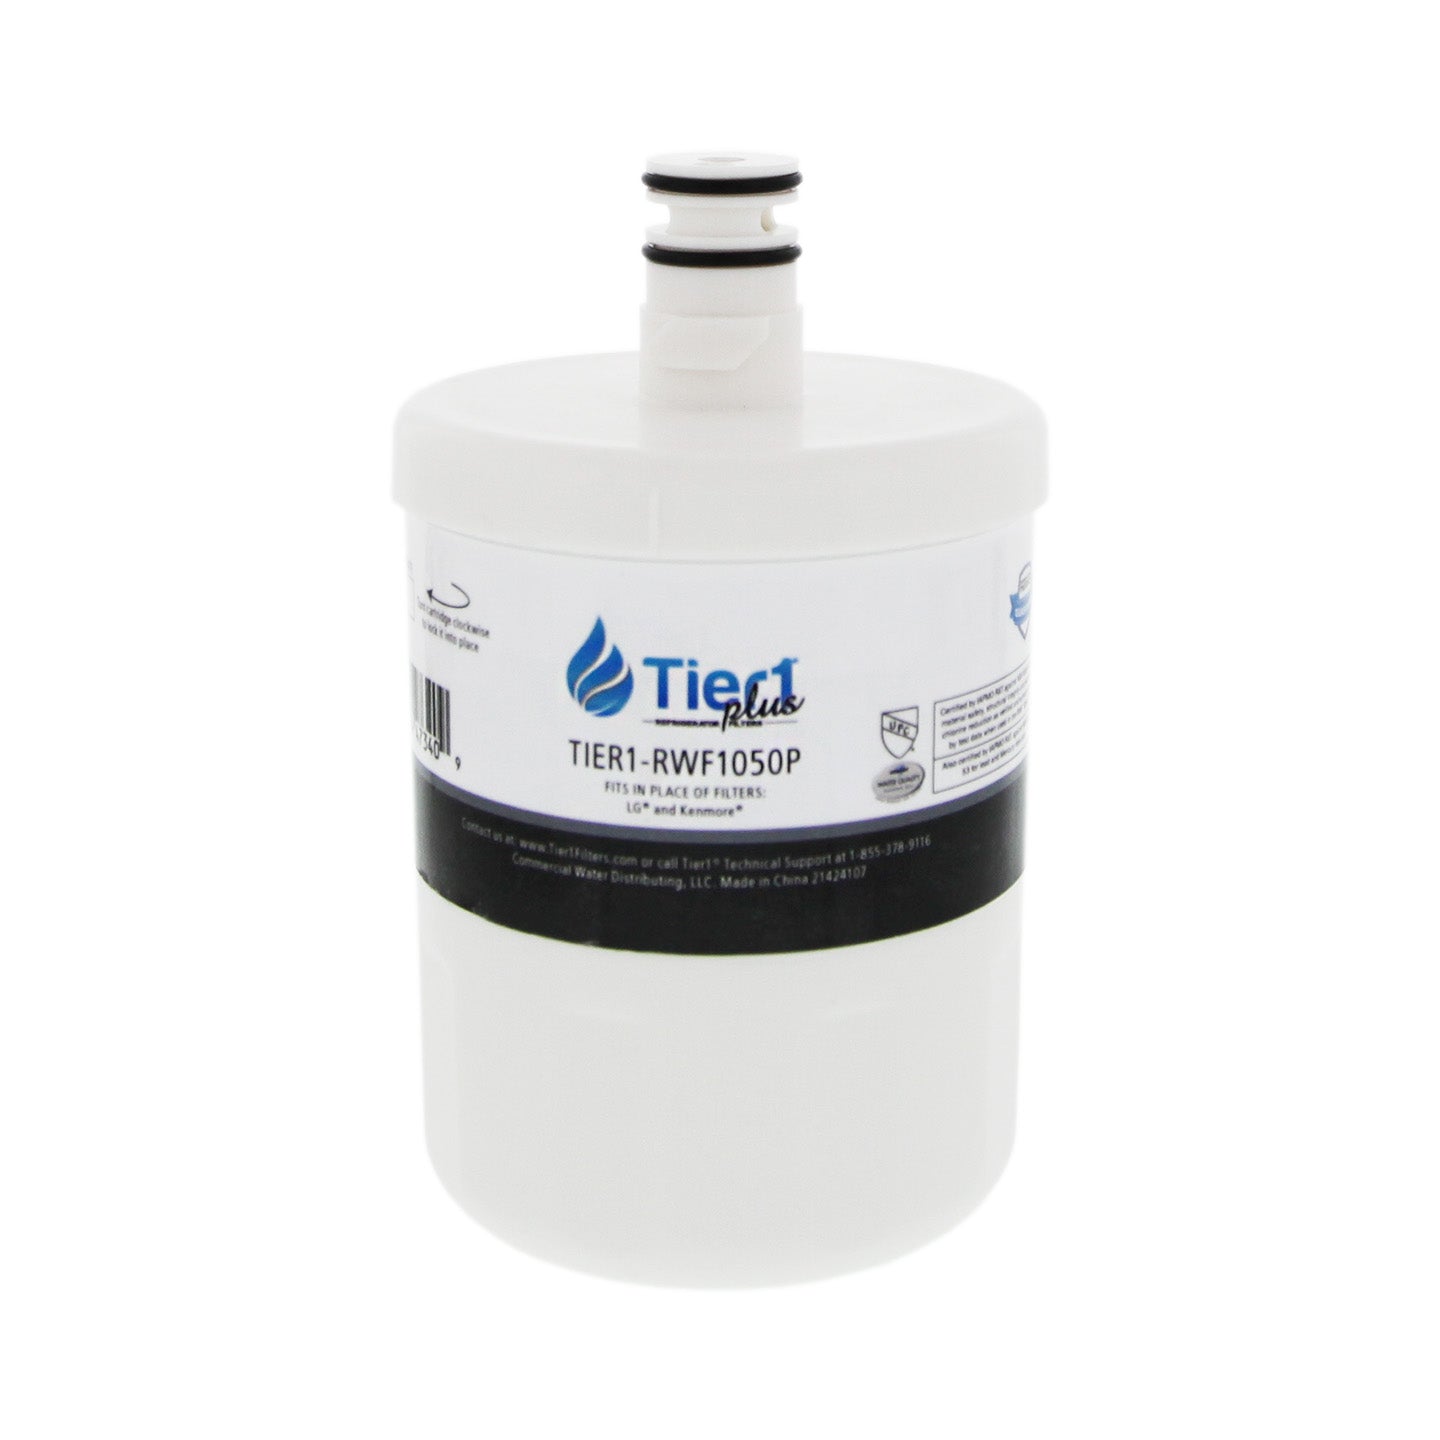 5231JA2002A / LT500P LG Comparable Tier1 Plus Refrigerator Water Filter Replacement (filter)